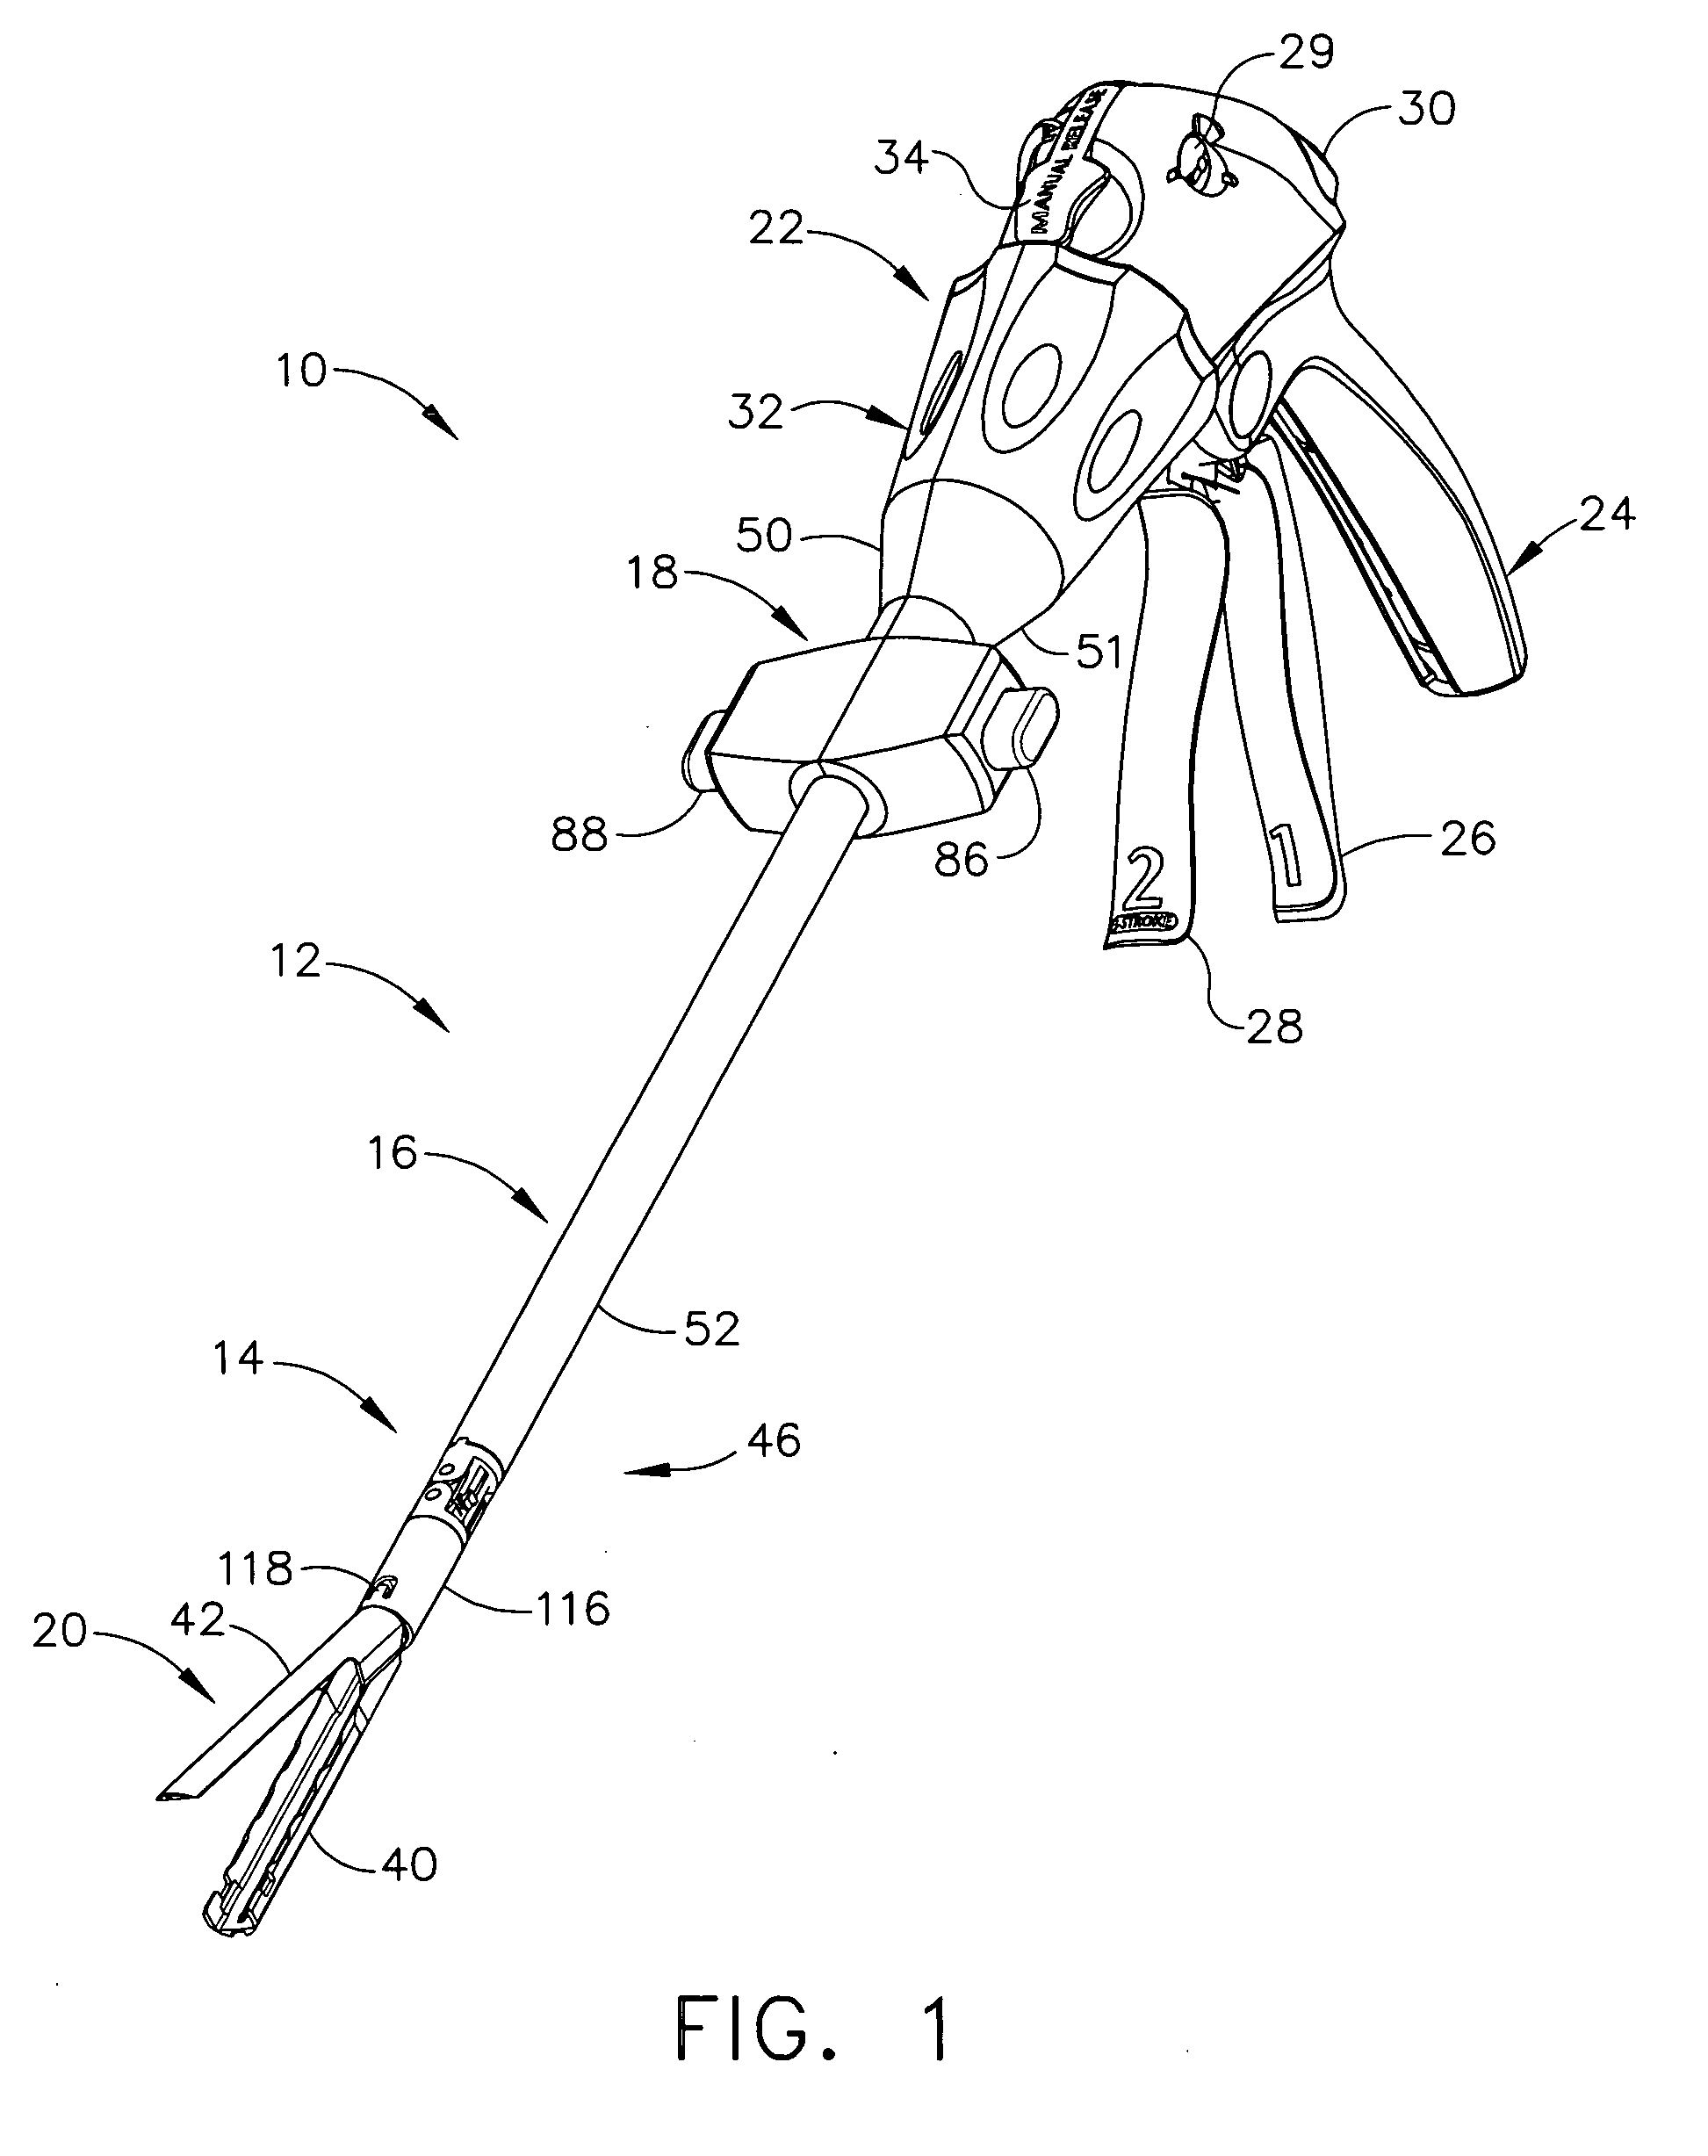 Surgical instrument with bending articulation controlled articulation pivot joint